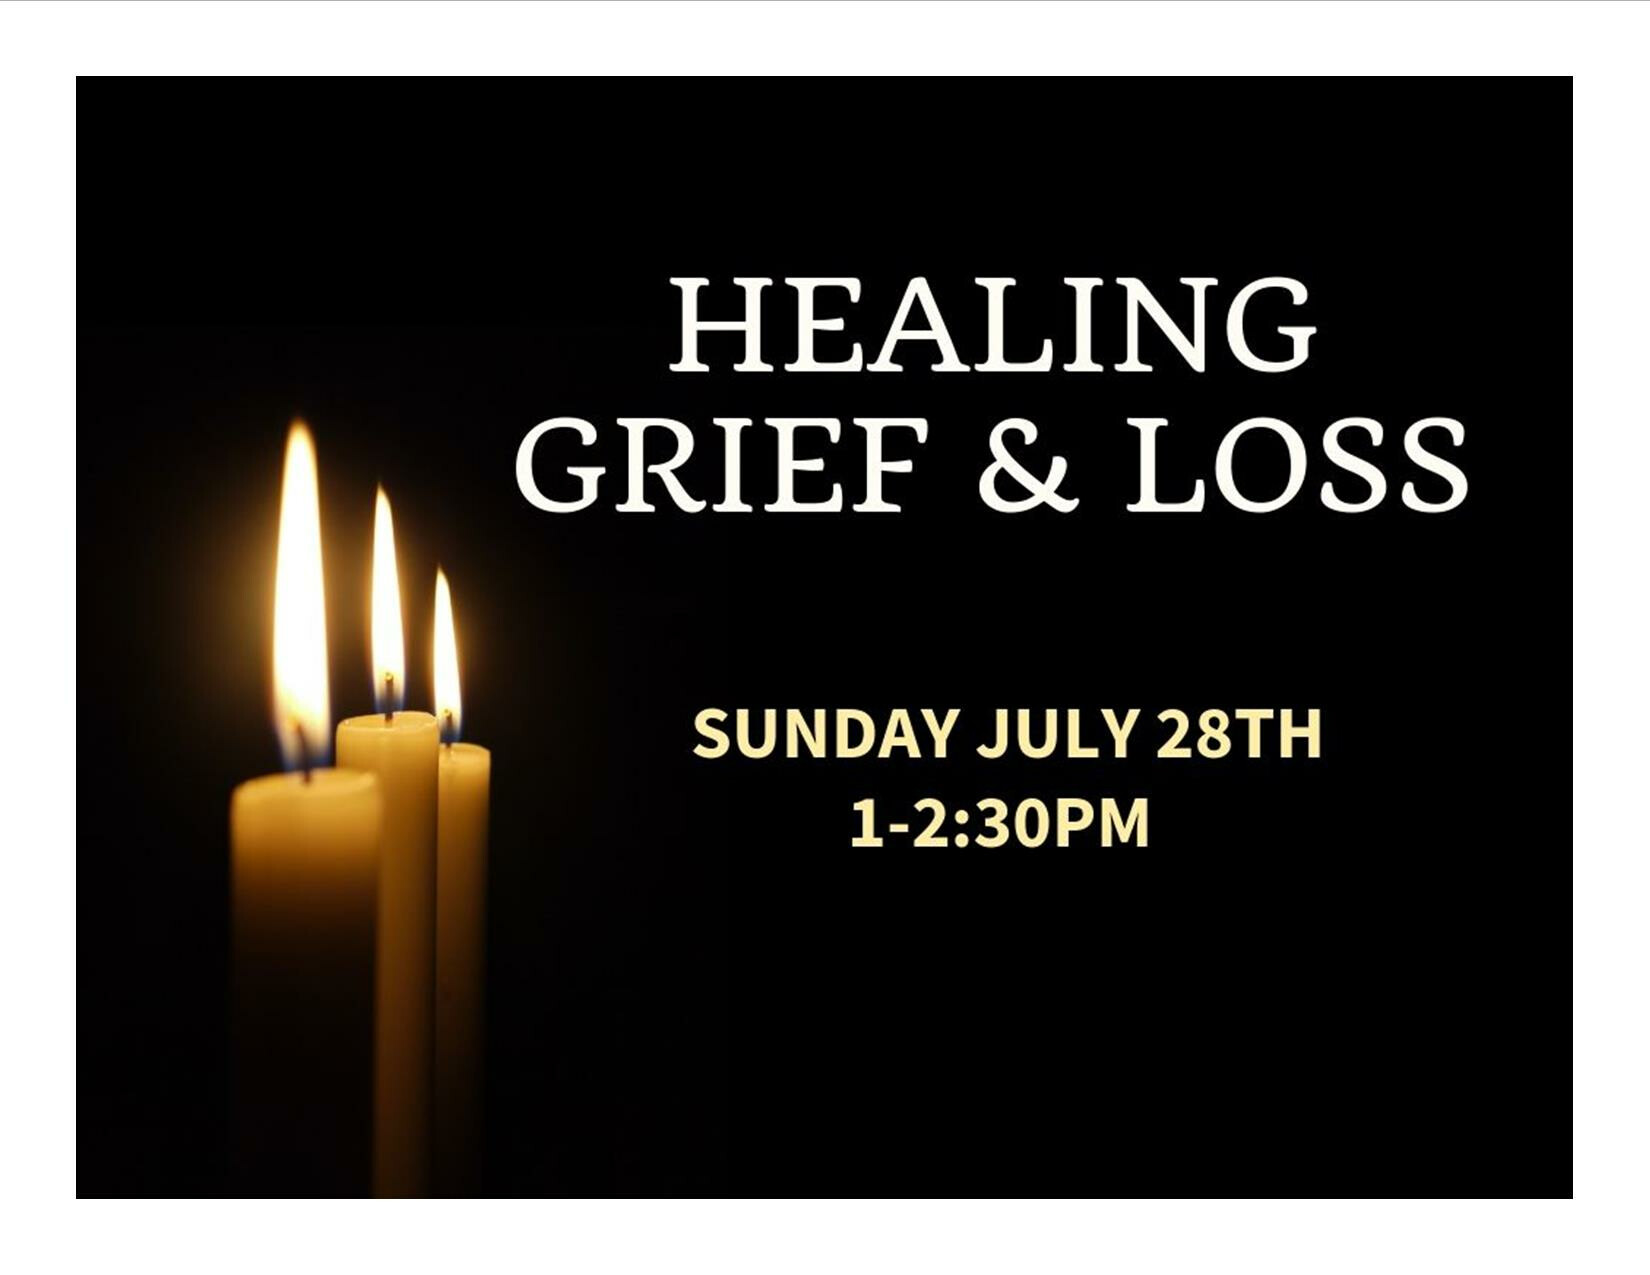 Healing Grief & Loss - 1pm-2:30pm